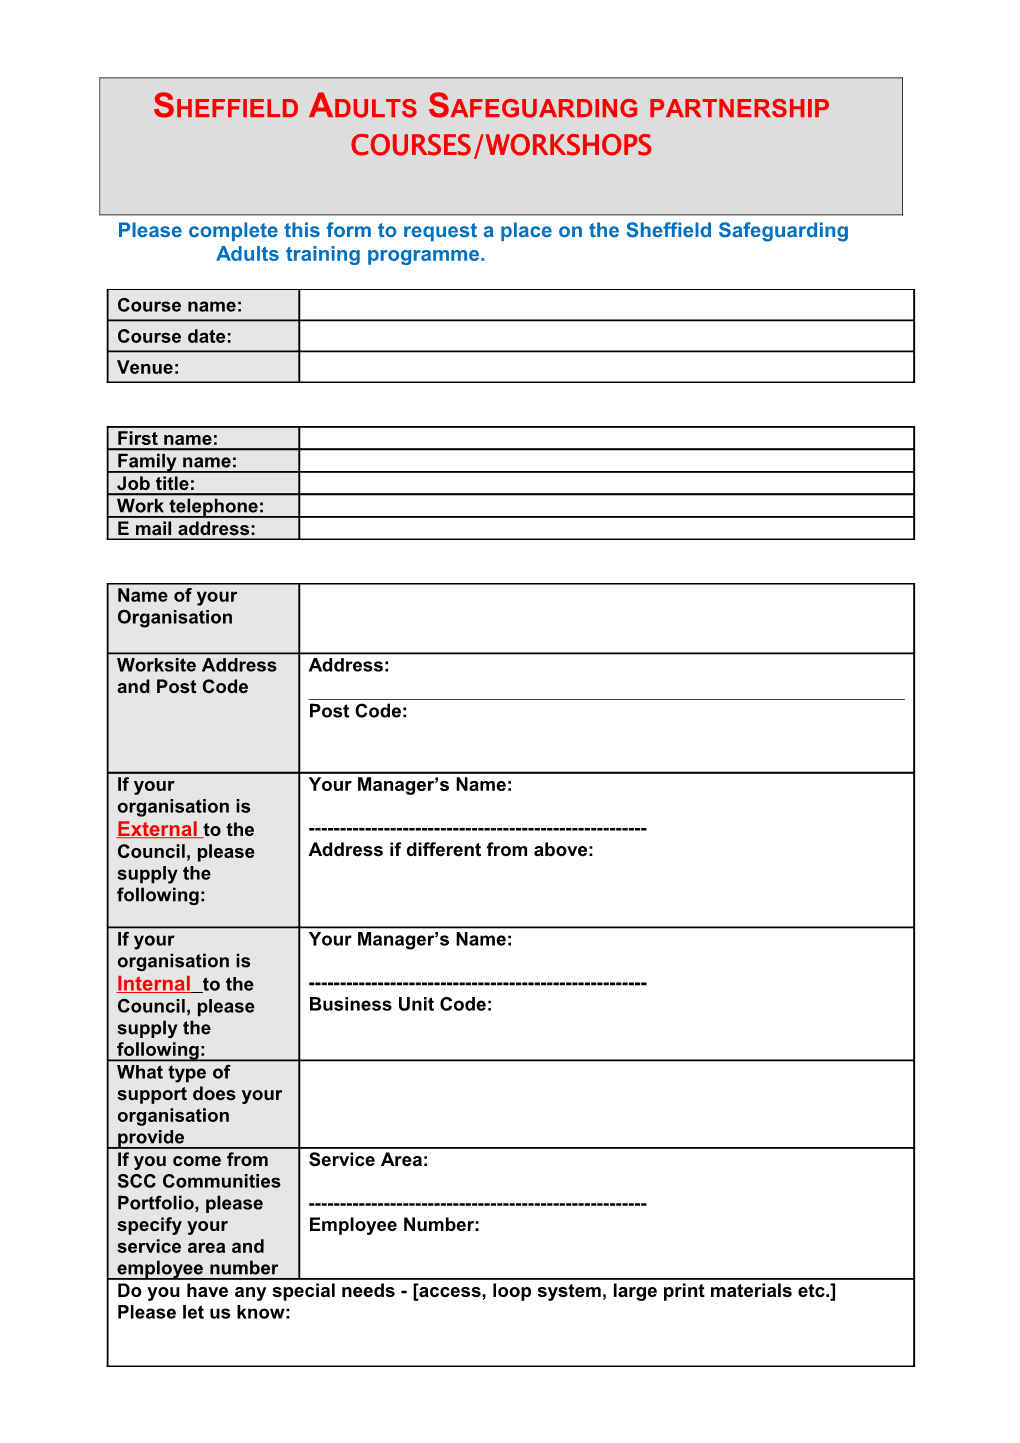 Please Complete This Form to Request a Place on the Sheffield Safeguarding Adultstraining